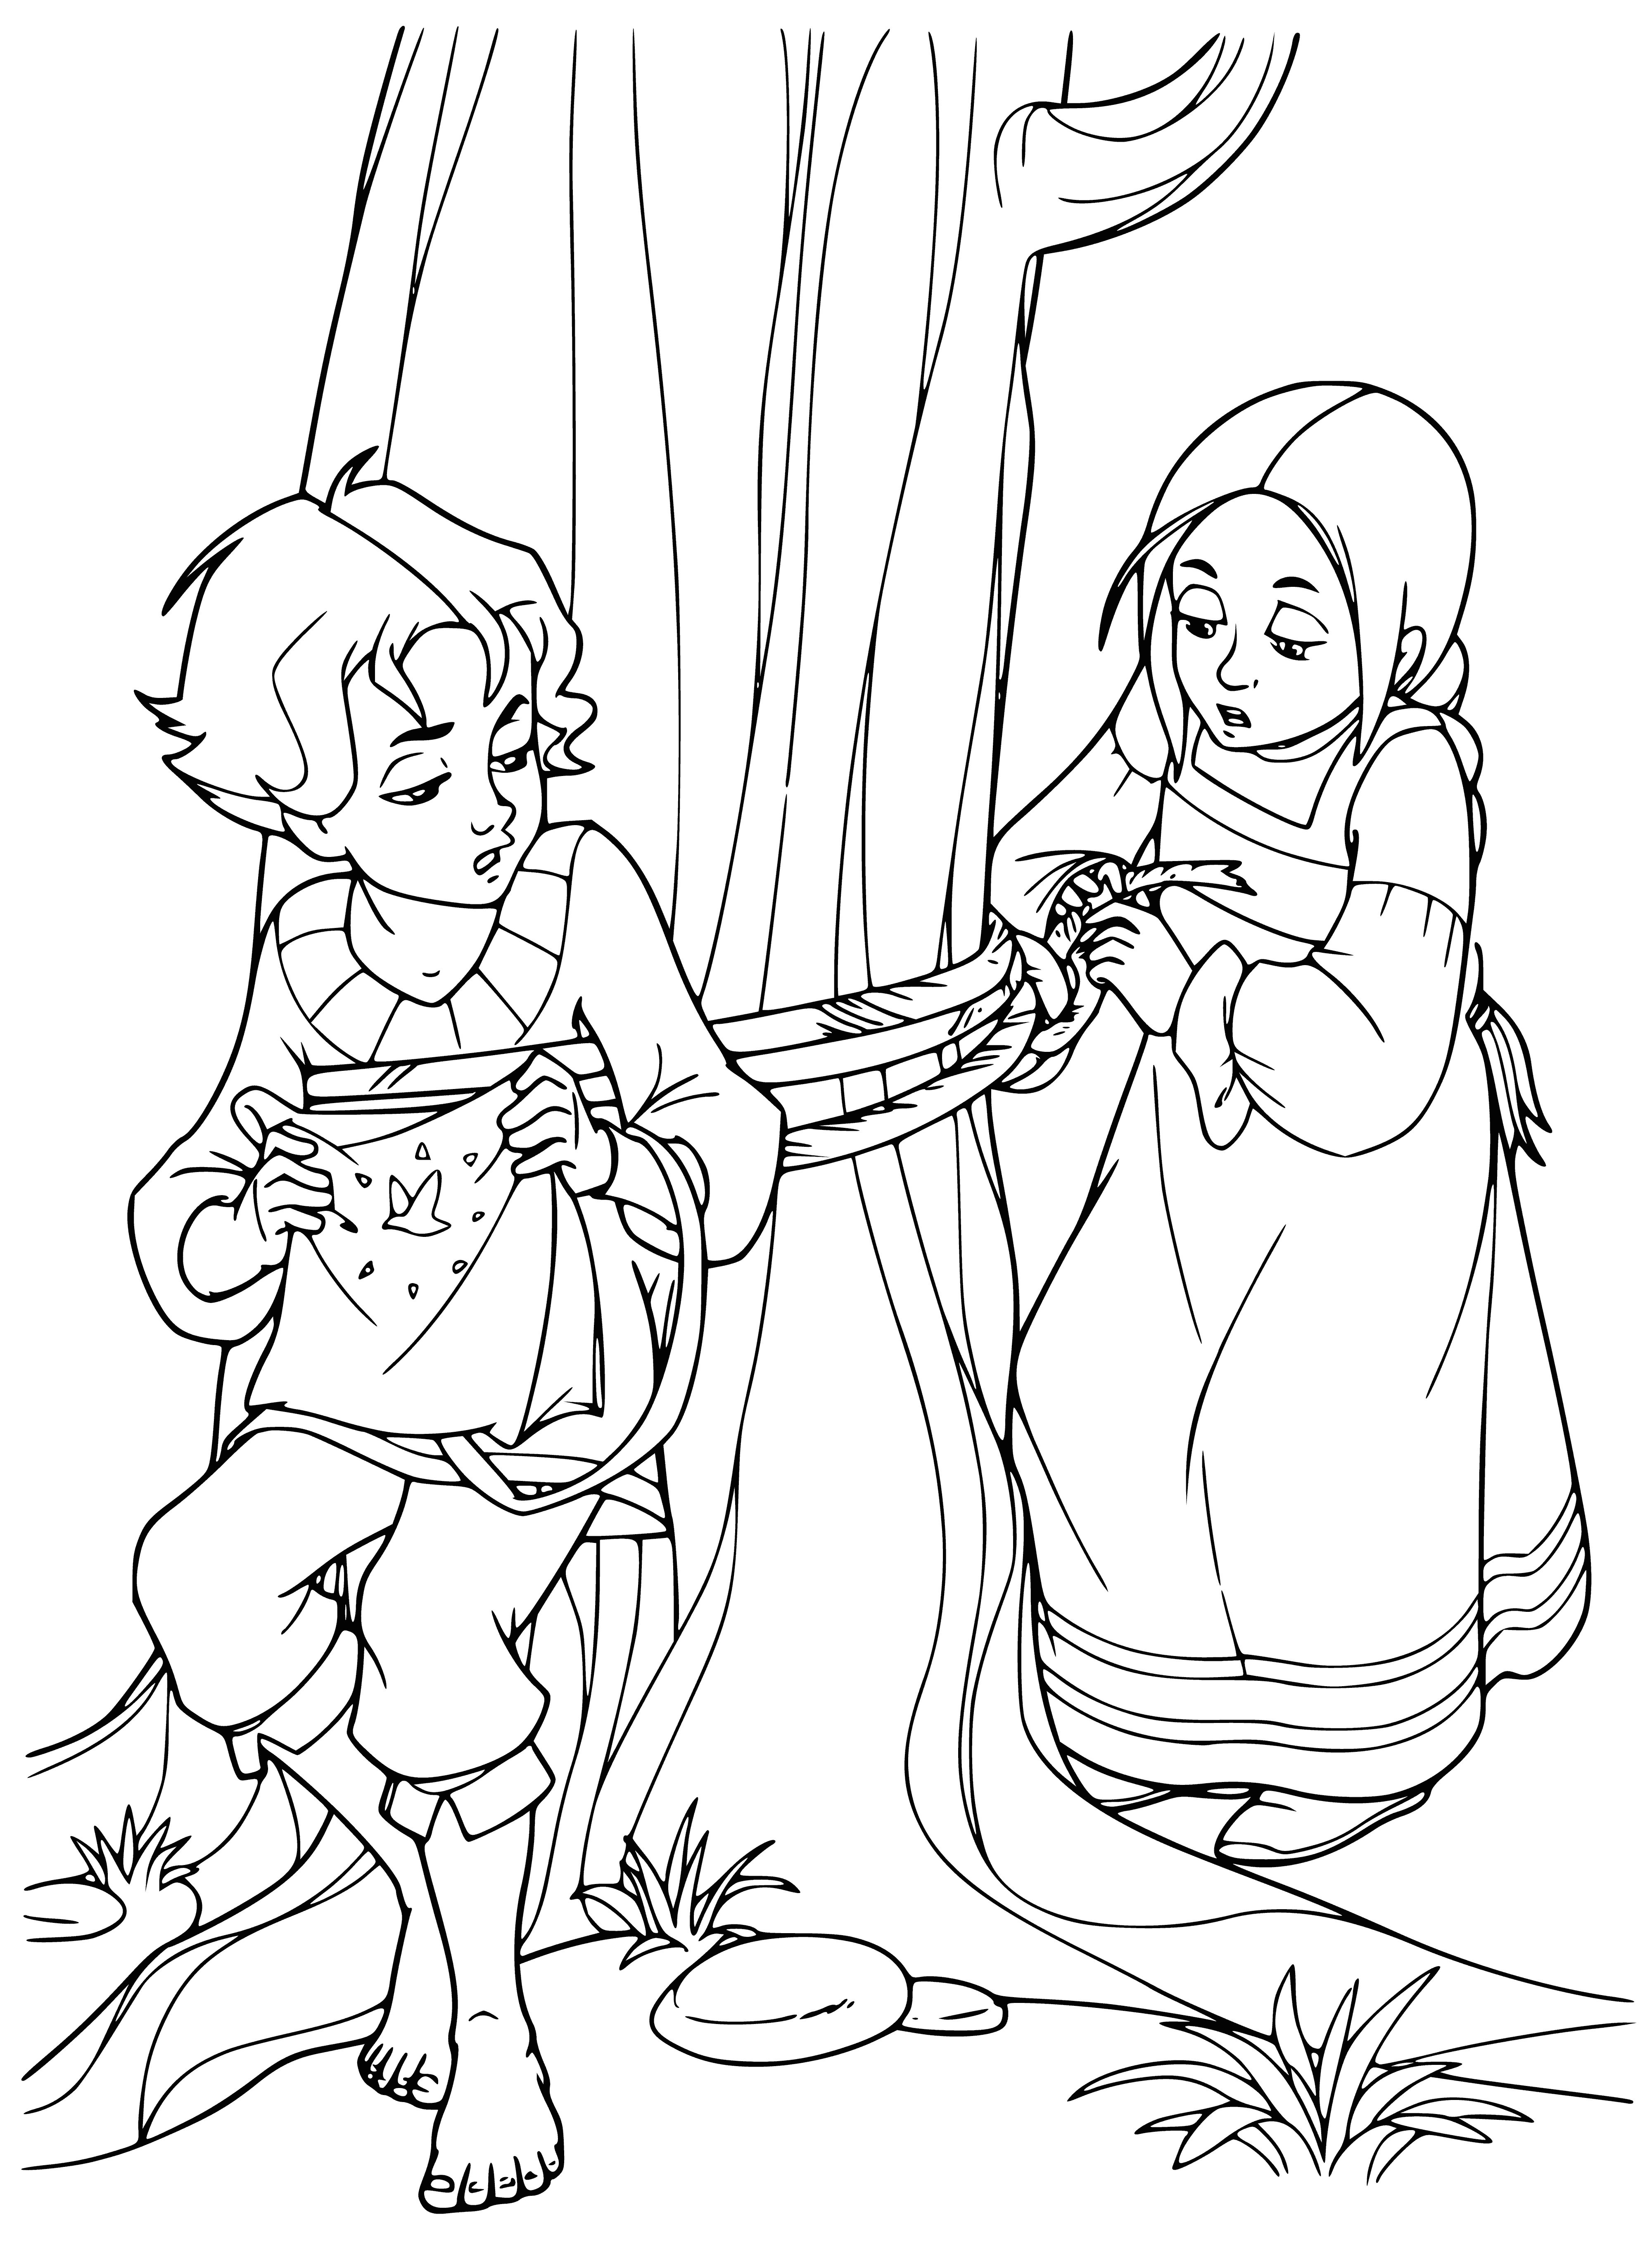 coloring page: A man & woman smiling, holding hands. She holds a flower, he has his arm on her shoulder.